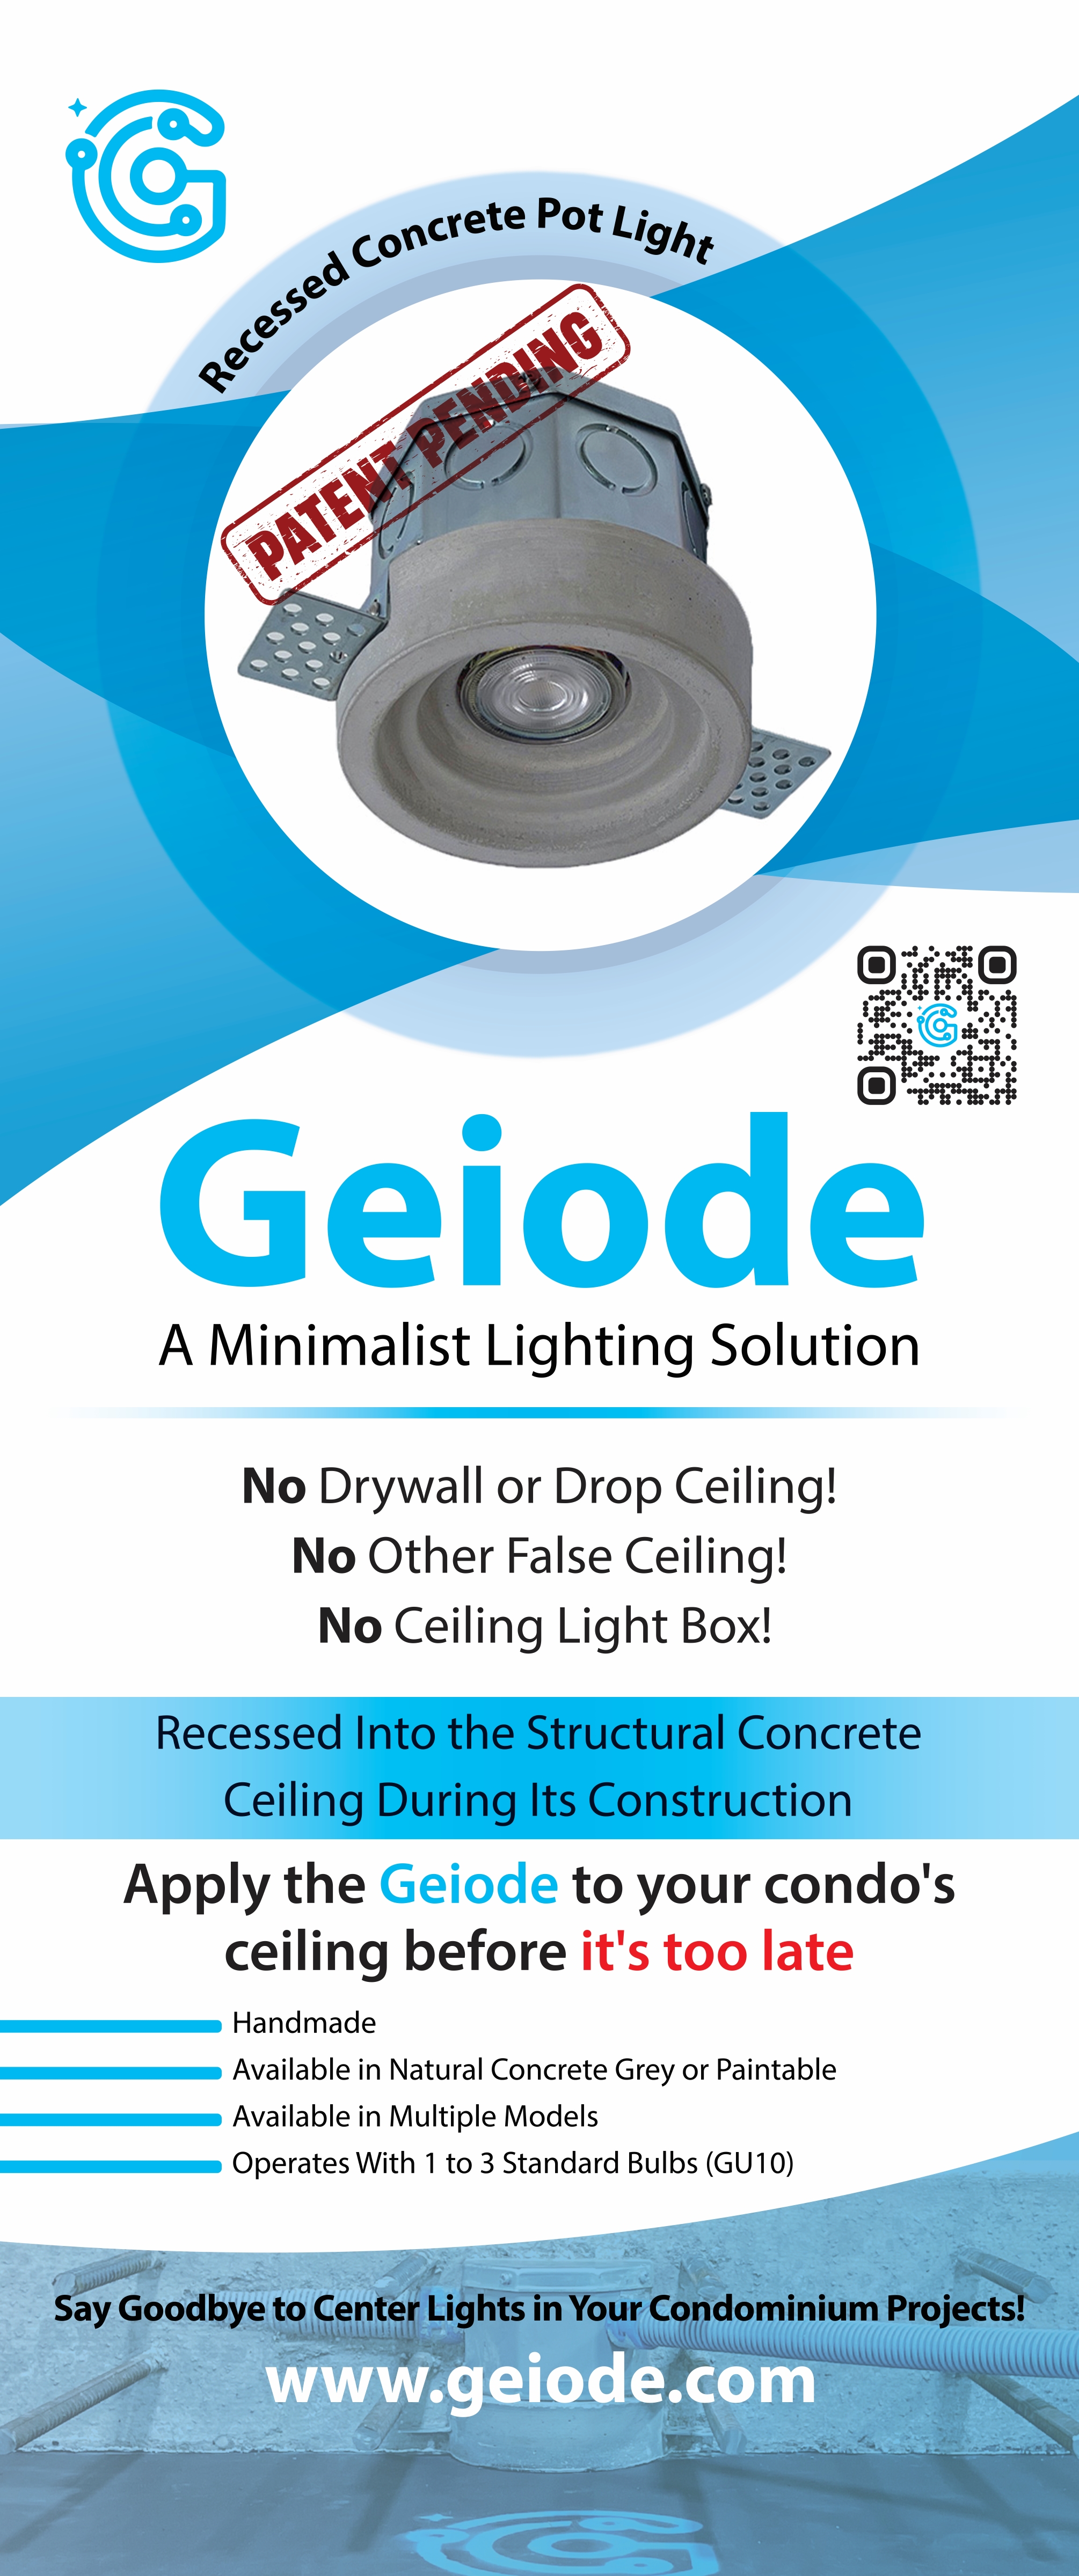 Geiode Lighting, Transform Your Space with Geiode: The Seamless, Stylish, and Superior Lighting Choice!